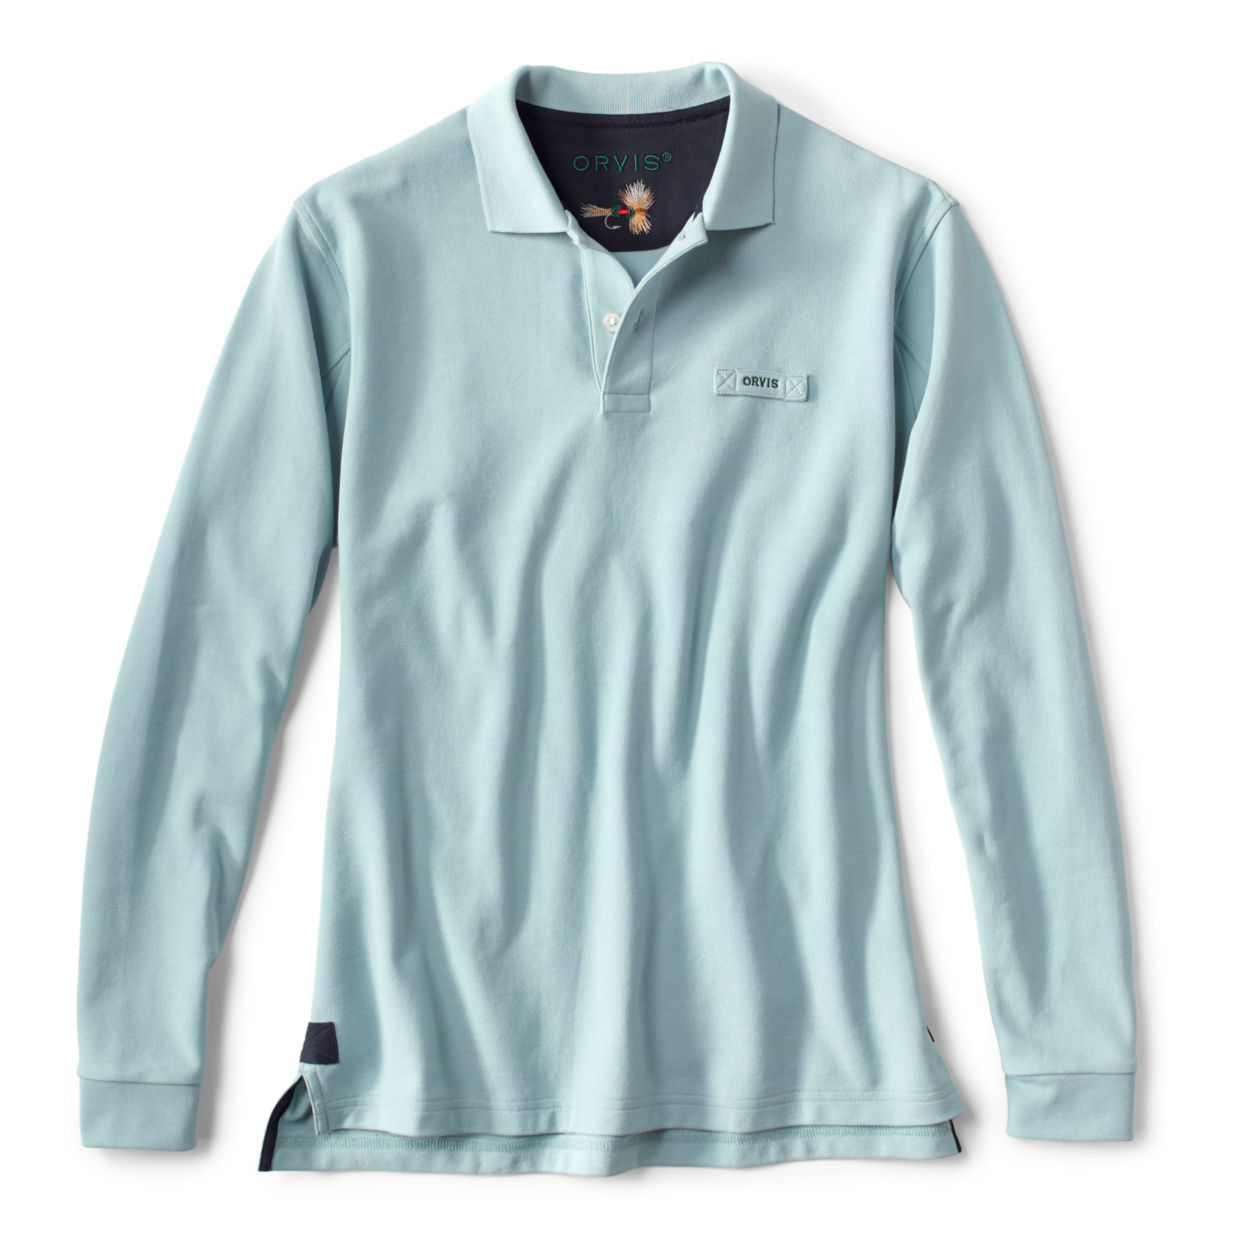 Men's The Orvis Signature Long-Sleeved Polo Shirt Mineral Blue Size 2XL